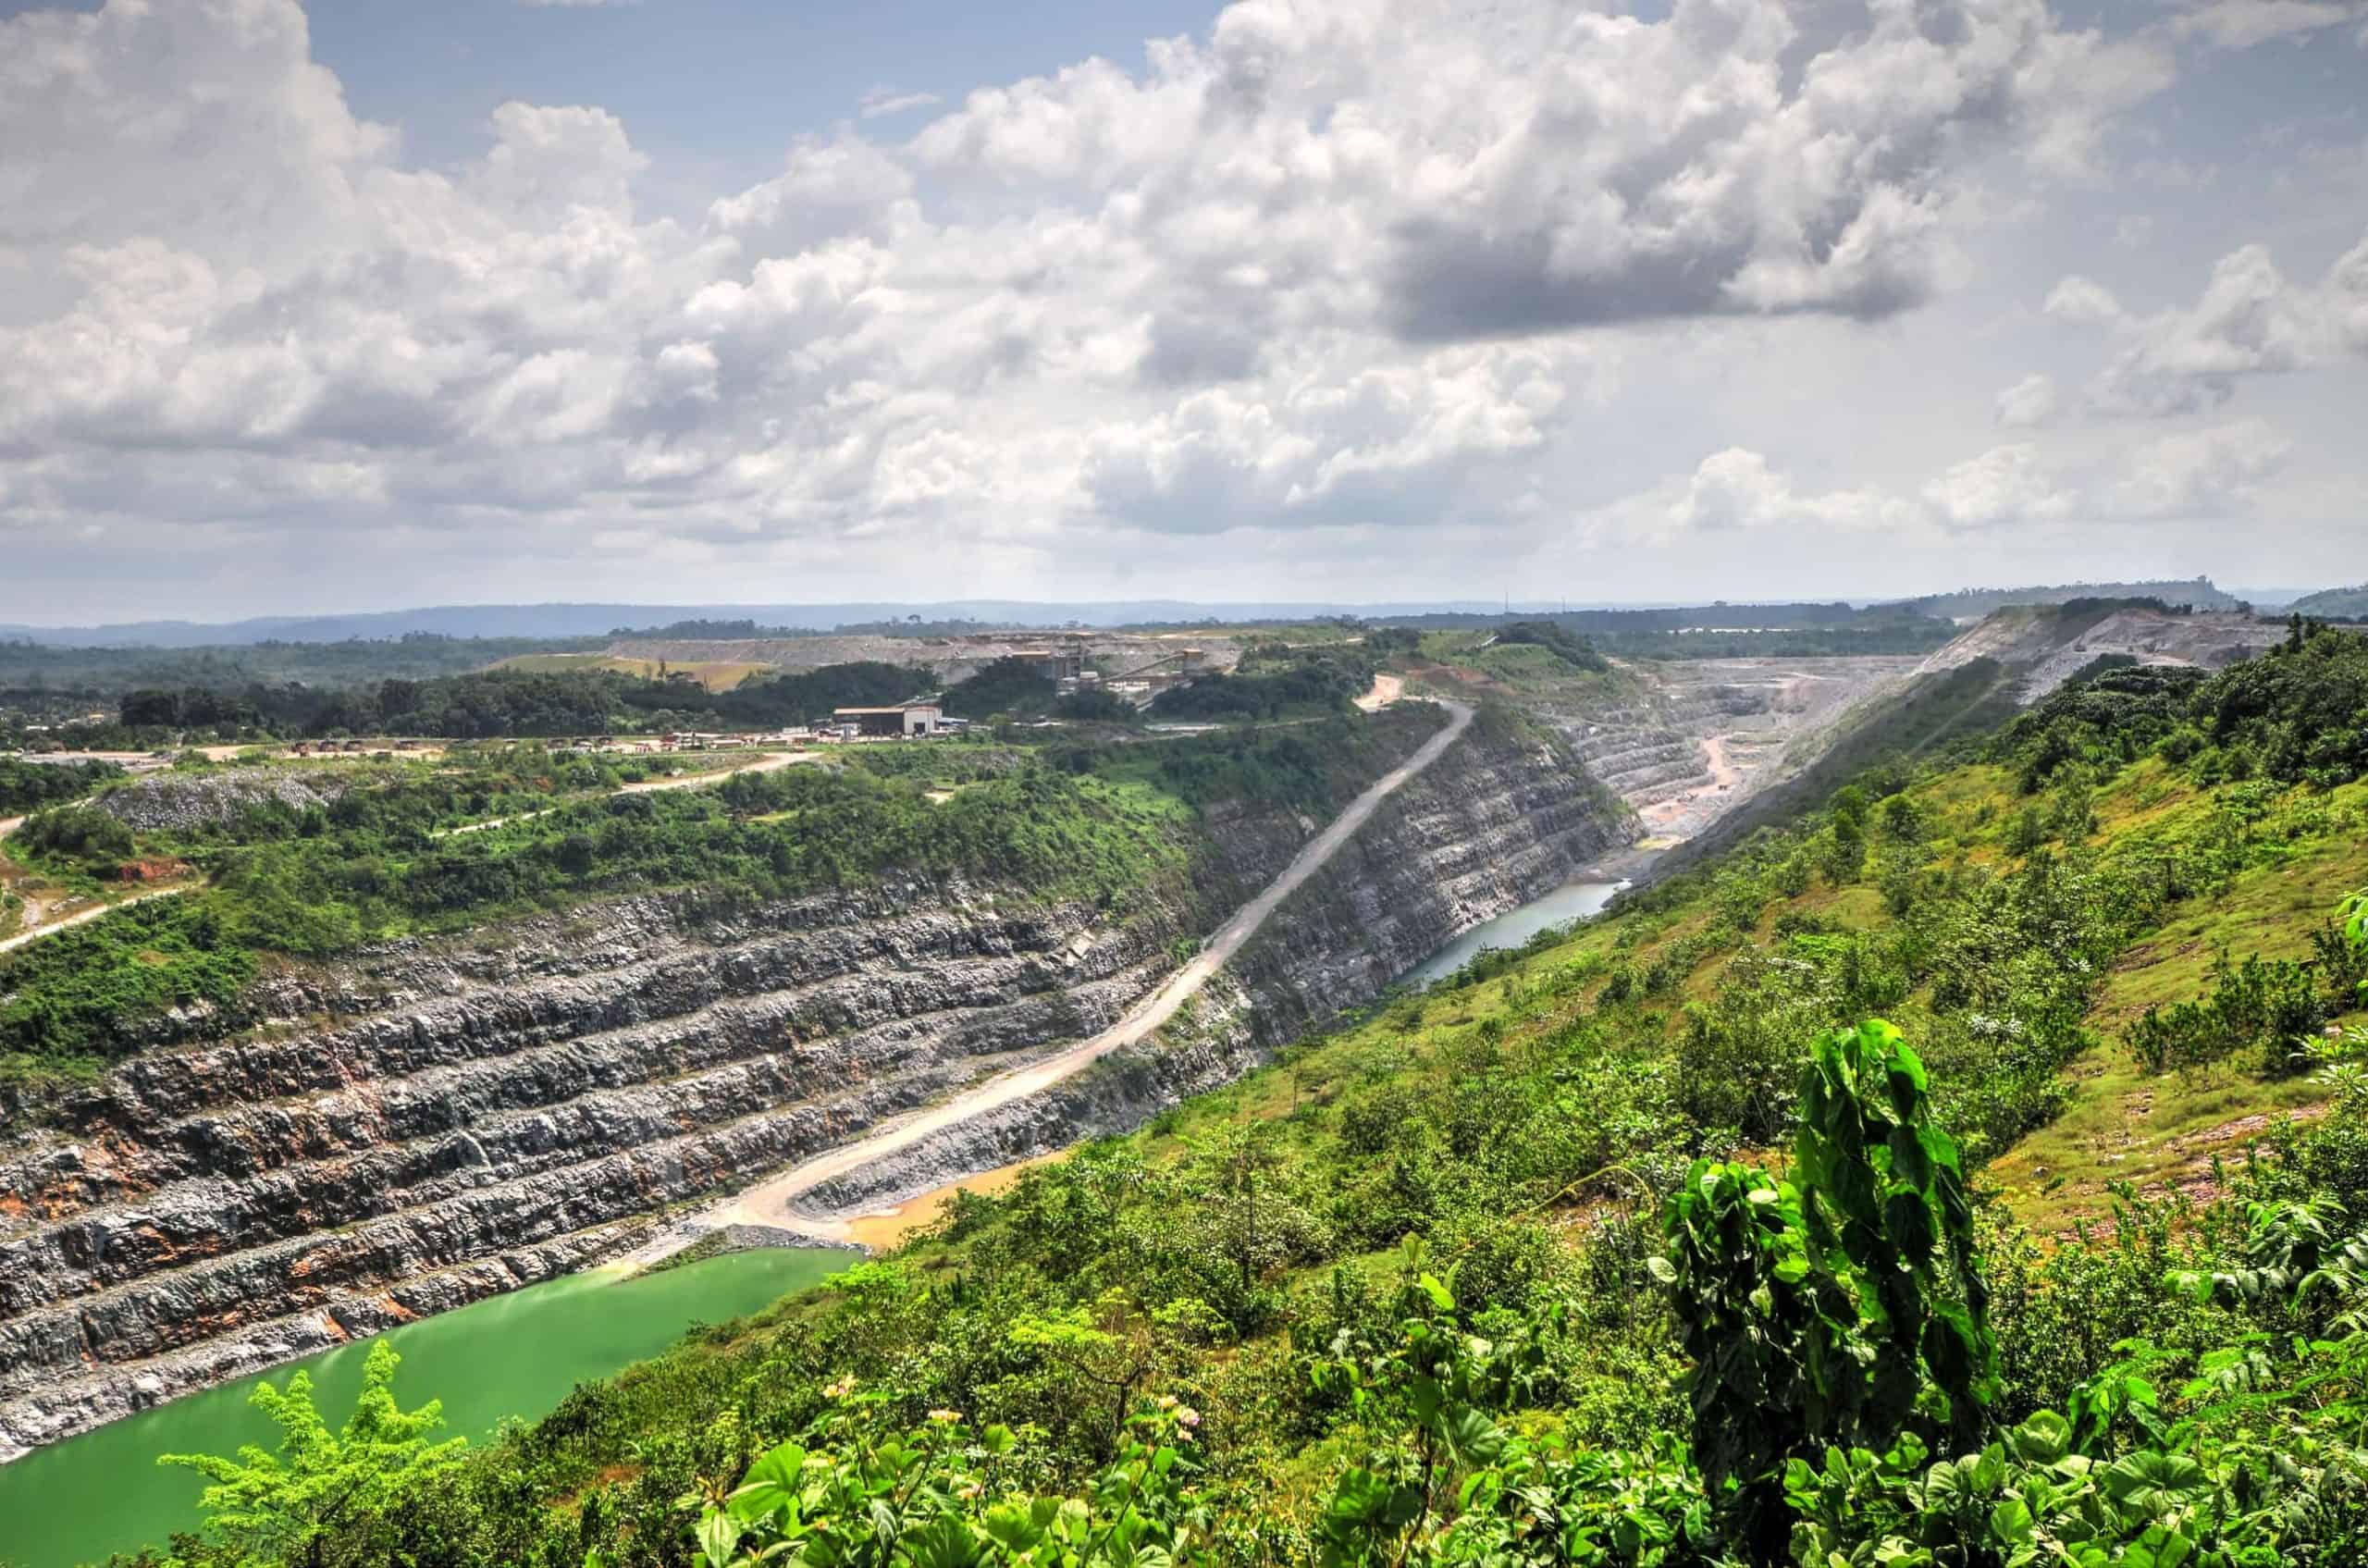 Open Pit Gold Mine in Ghana, Africa with a view of the cut out earth.